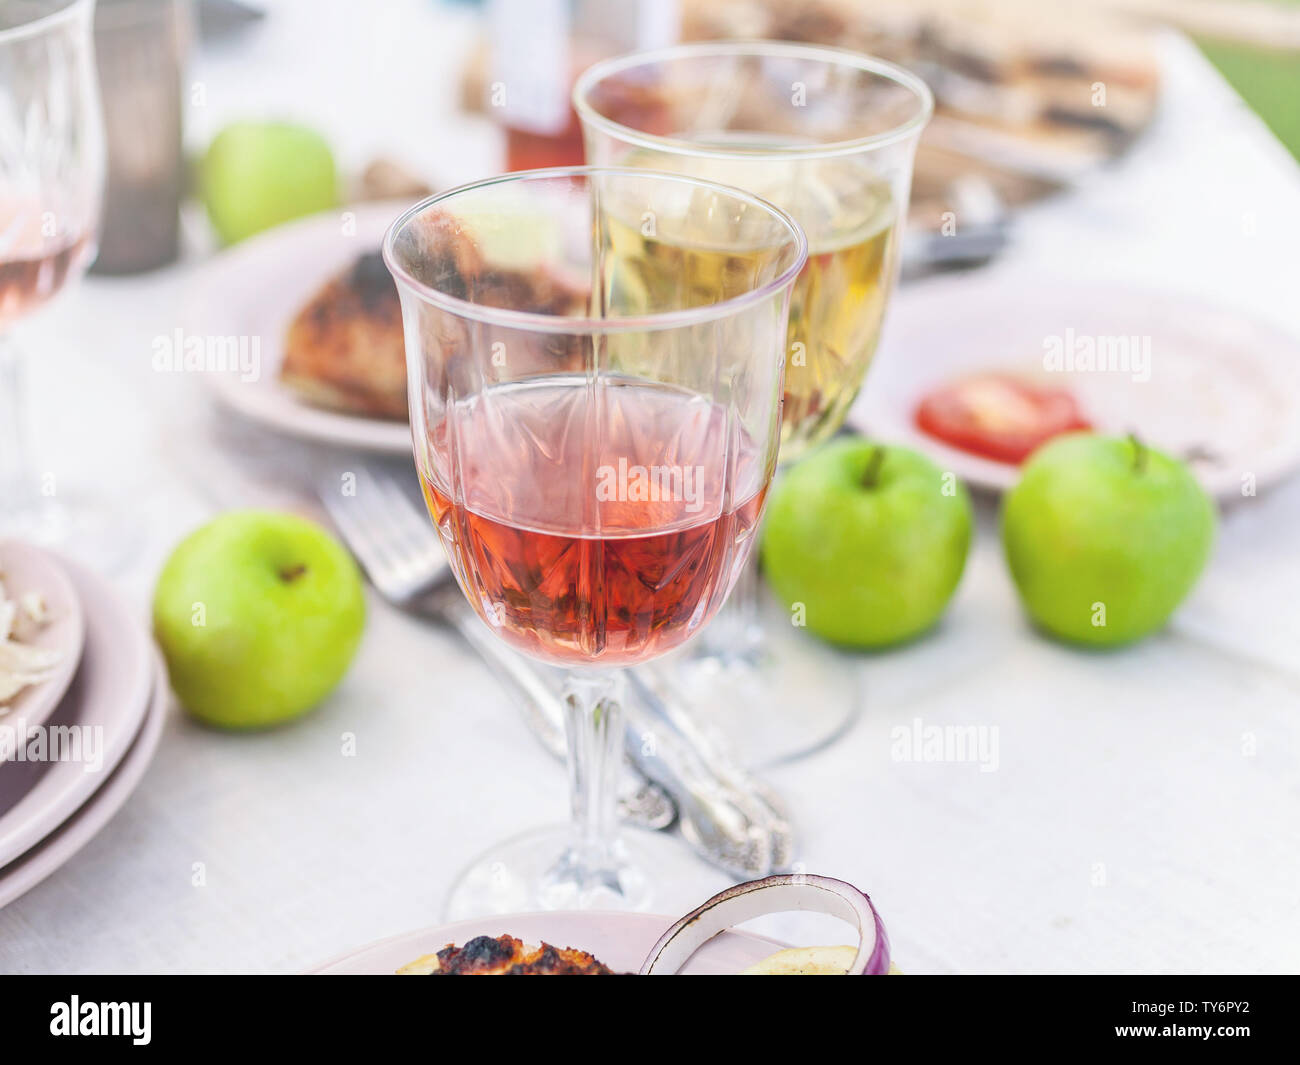 Grilled grouper, glasses with white and rose wine, plates, vegetables, salad and fruits on the table. Summer party in the backyard. Horizontal shot Stock Photo